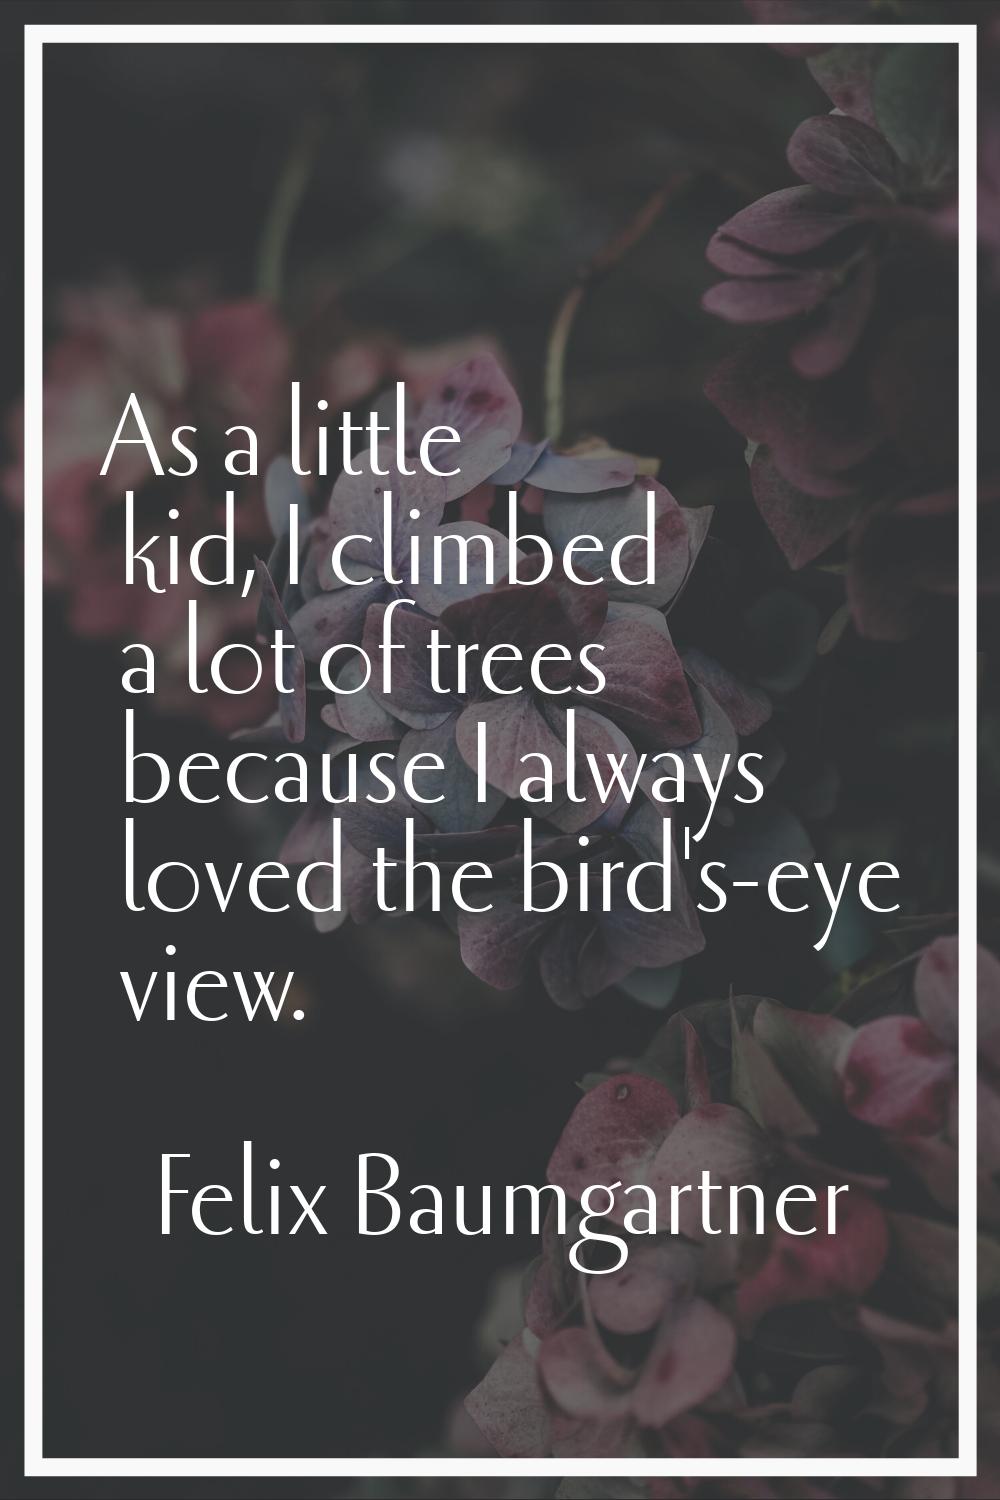 As a little kid, I climbed a lot of trees because I always loved the bird's-eye view.